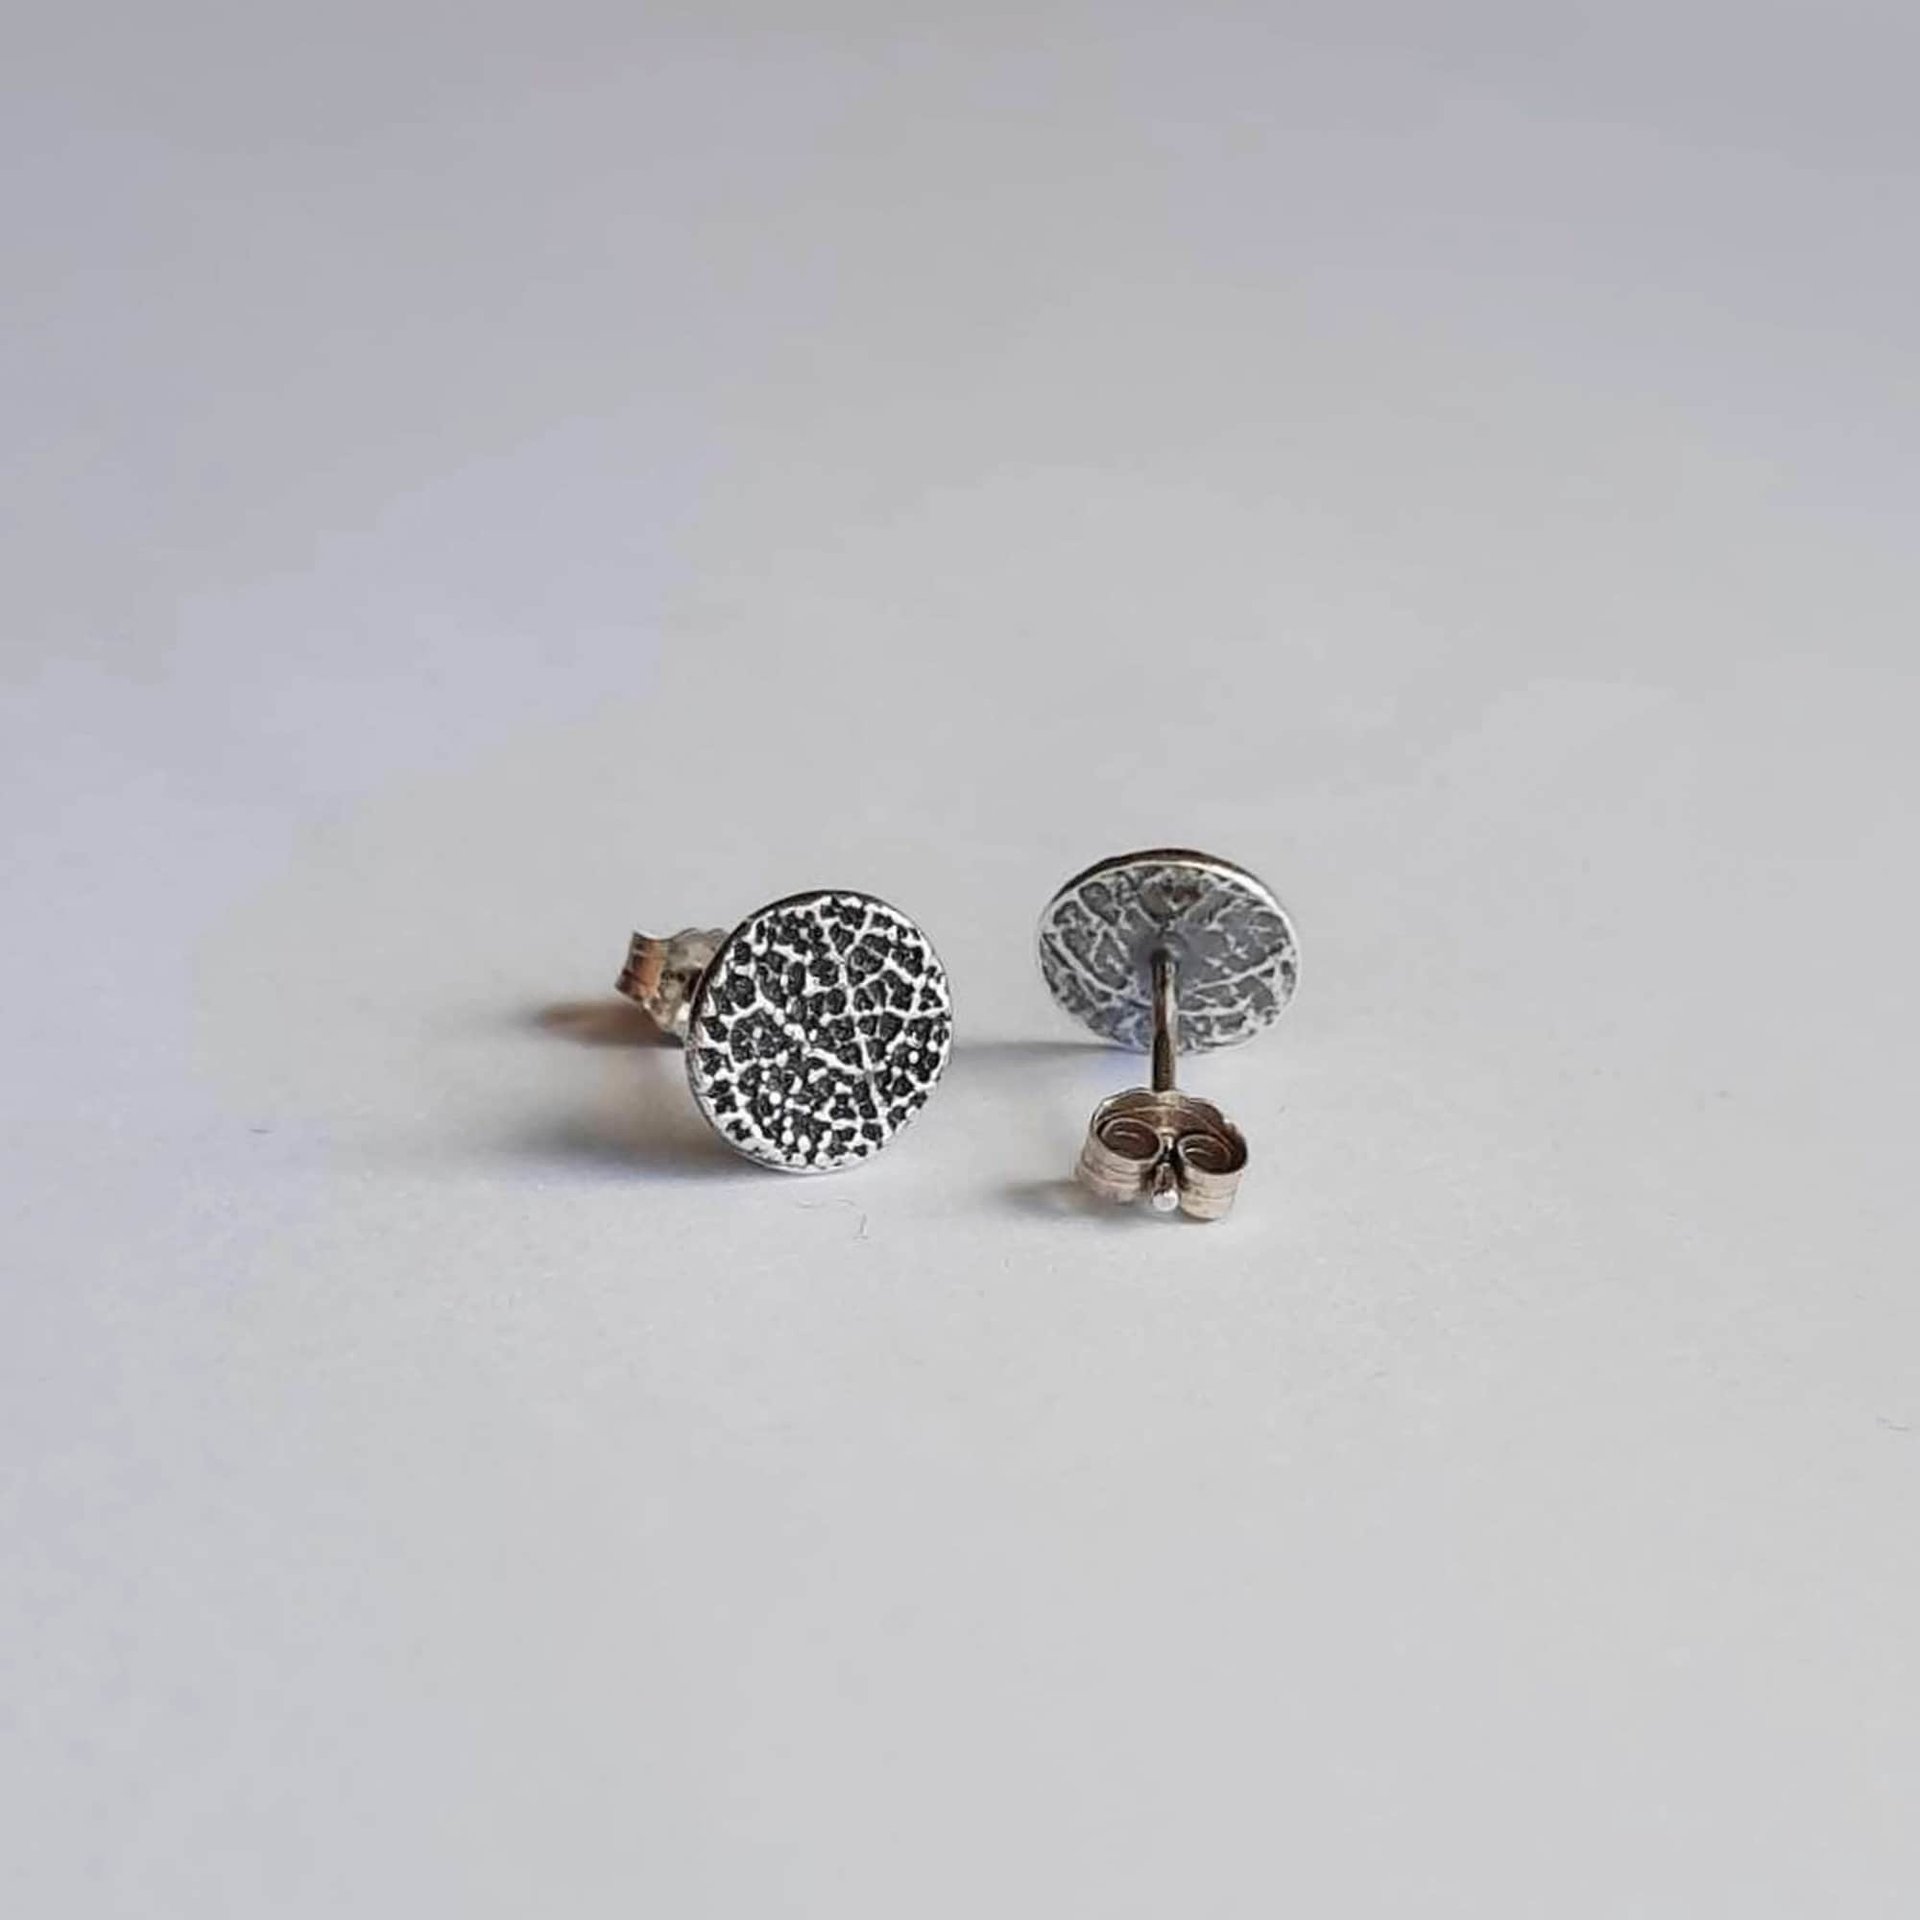 Tiny Silver Botanical Round Stud Earrings ~ Handmade by The Tiny Tree Frog Jewellery